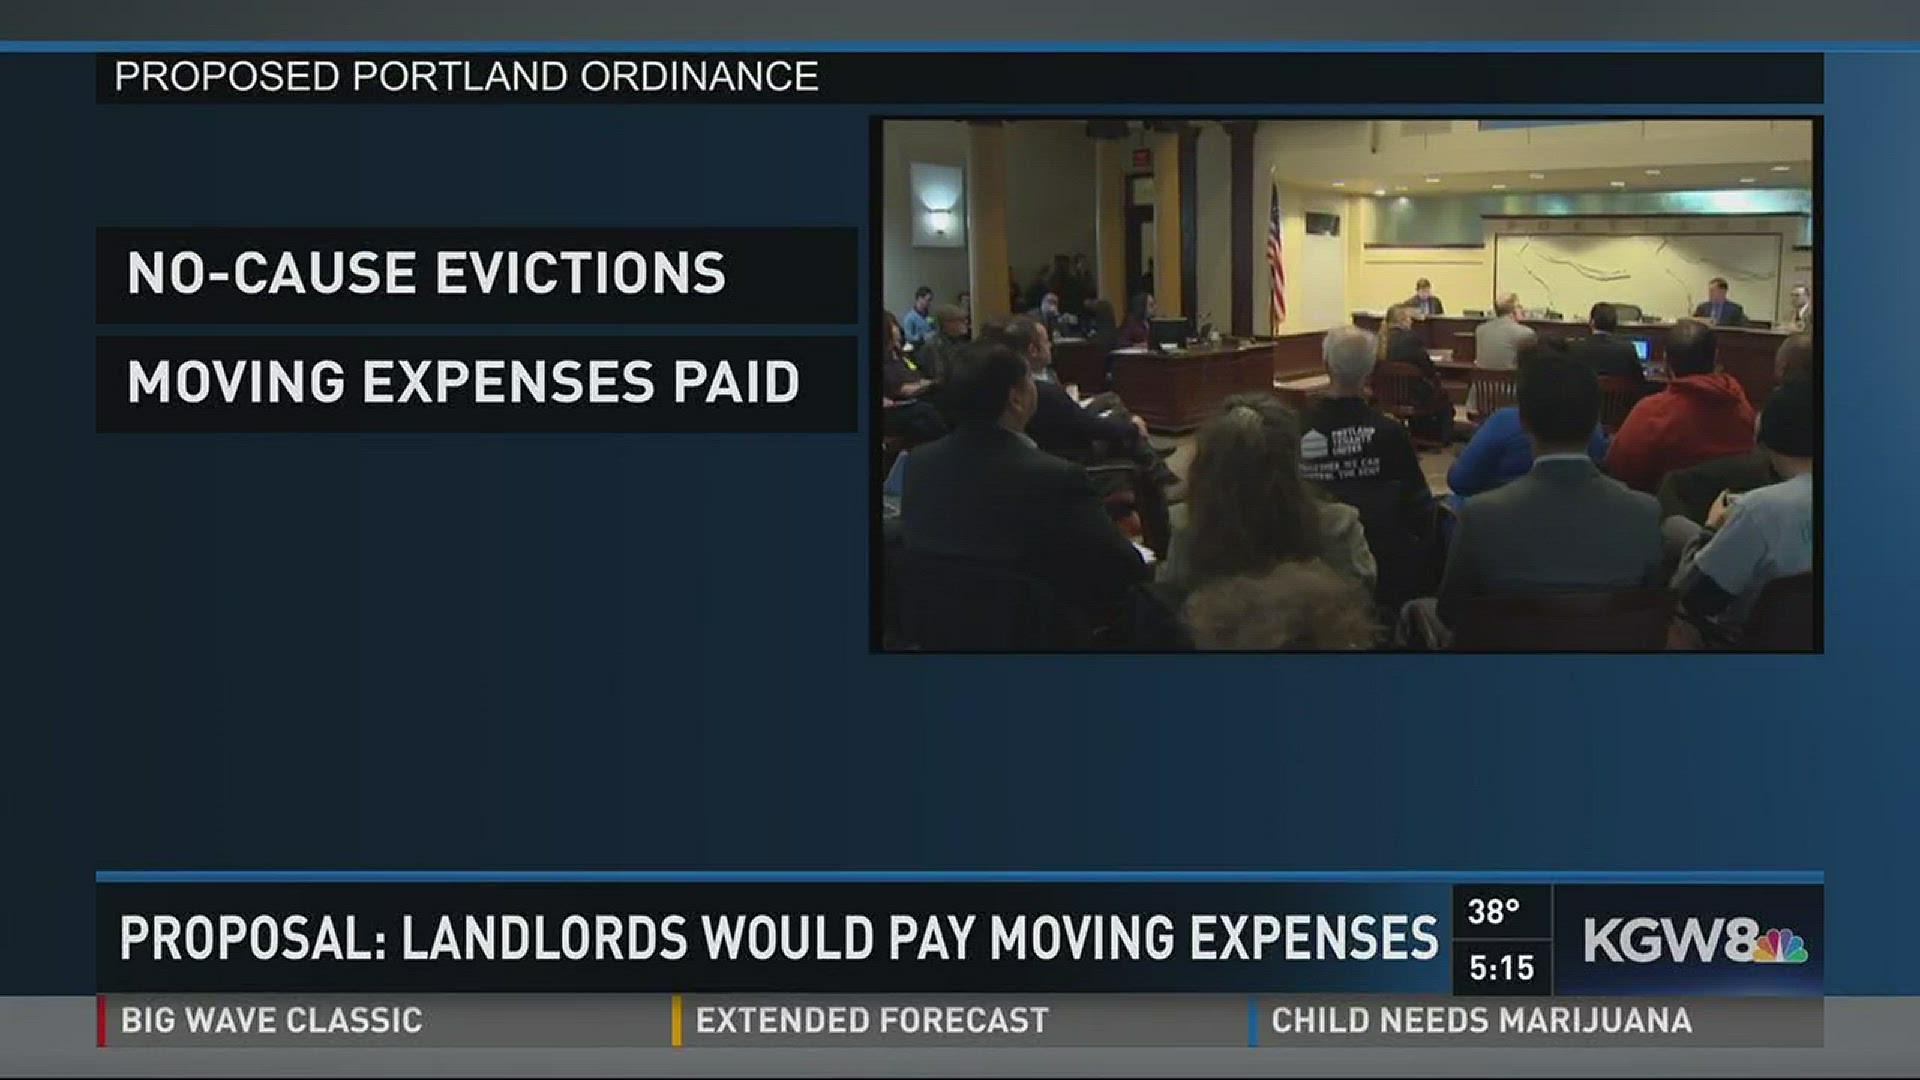 Proposal would force landlords to paying moving expenses for no-cause evictions